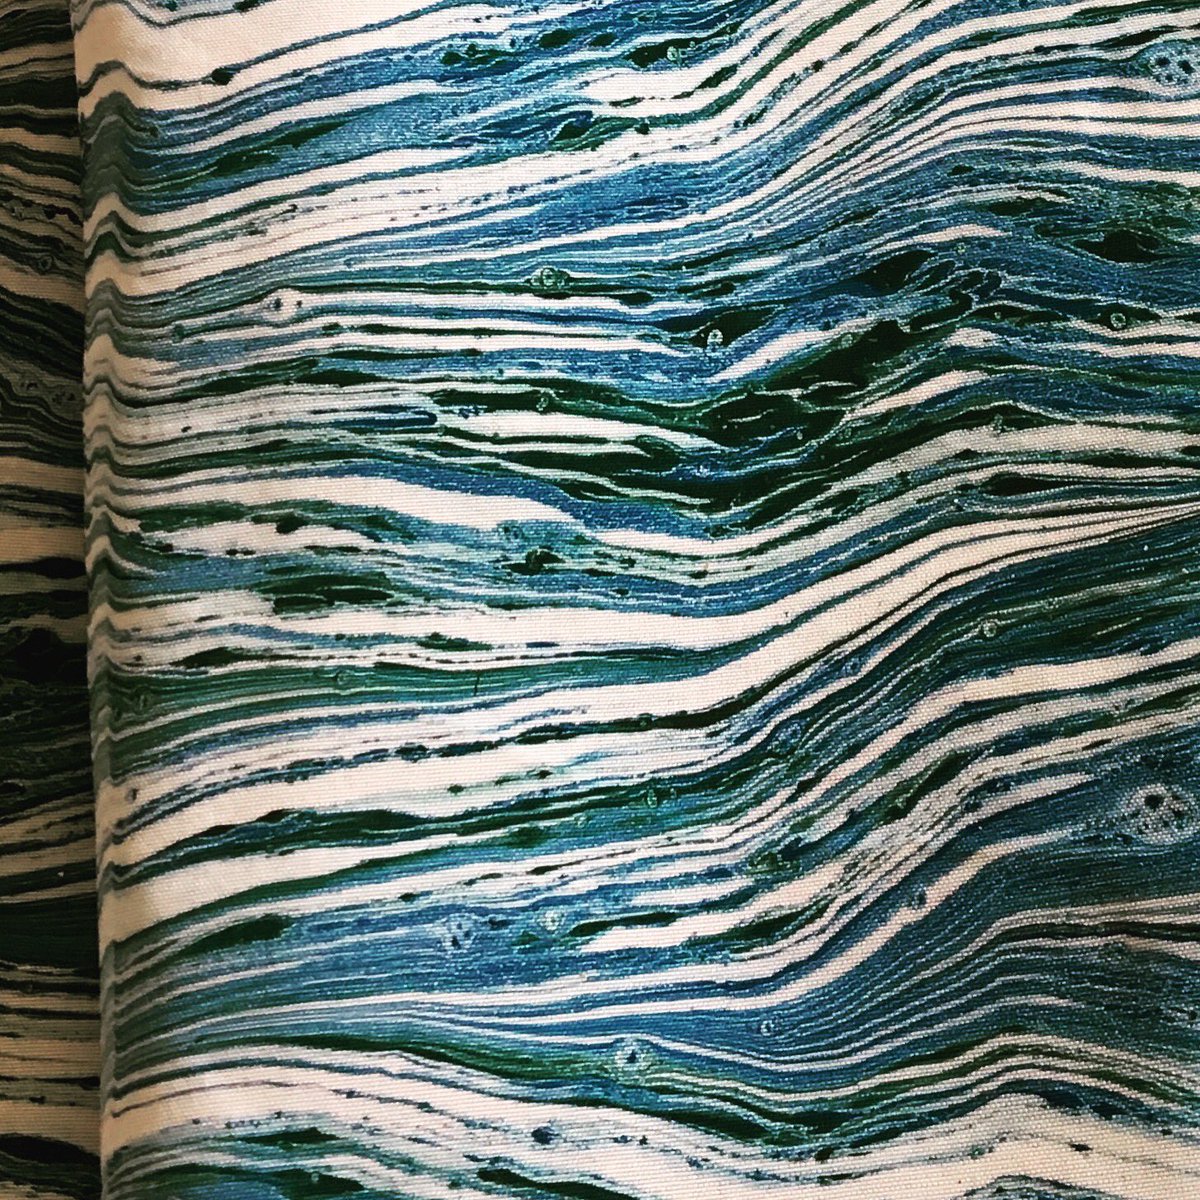 Some marbled silk for today's #marbledmonday More marbled textiles to come over next few weeks. #handmarbled